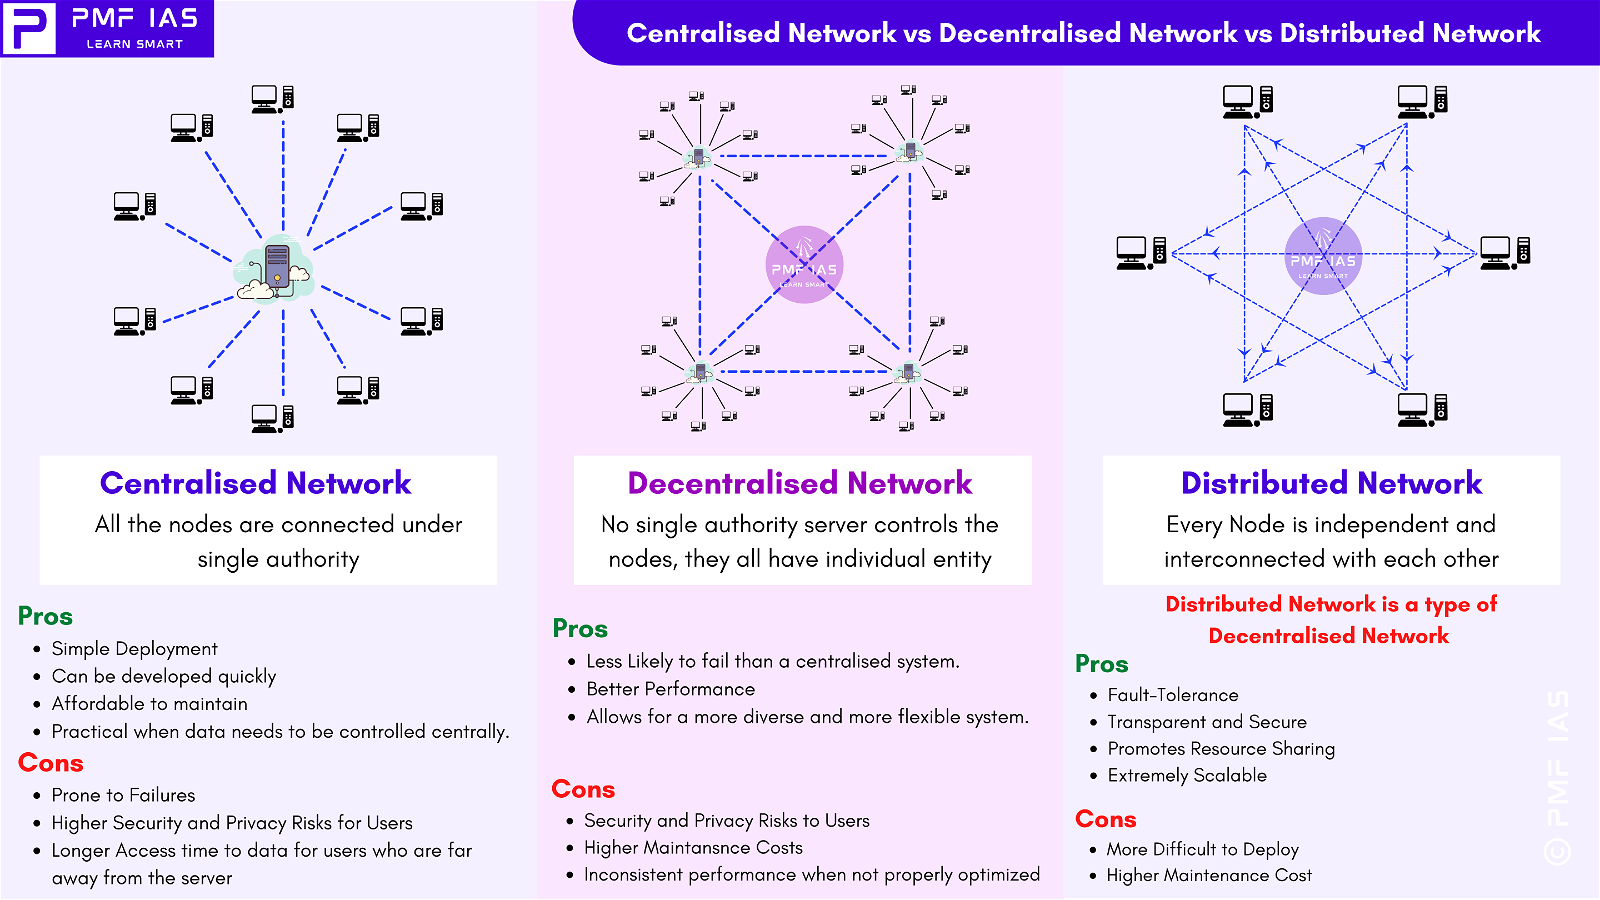 Centralised Network vs Decentralised Network vs Distributed Network